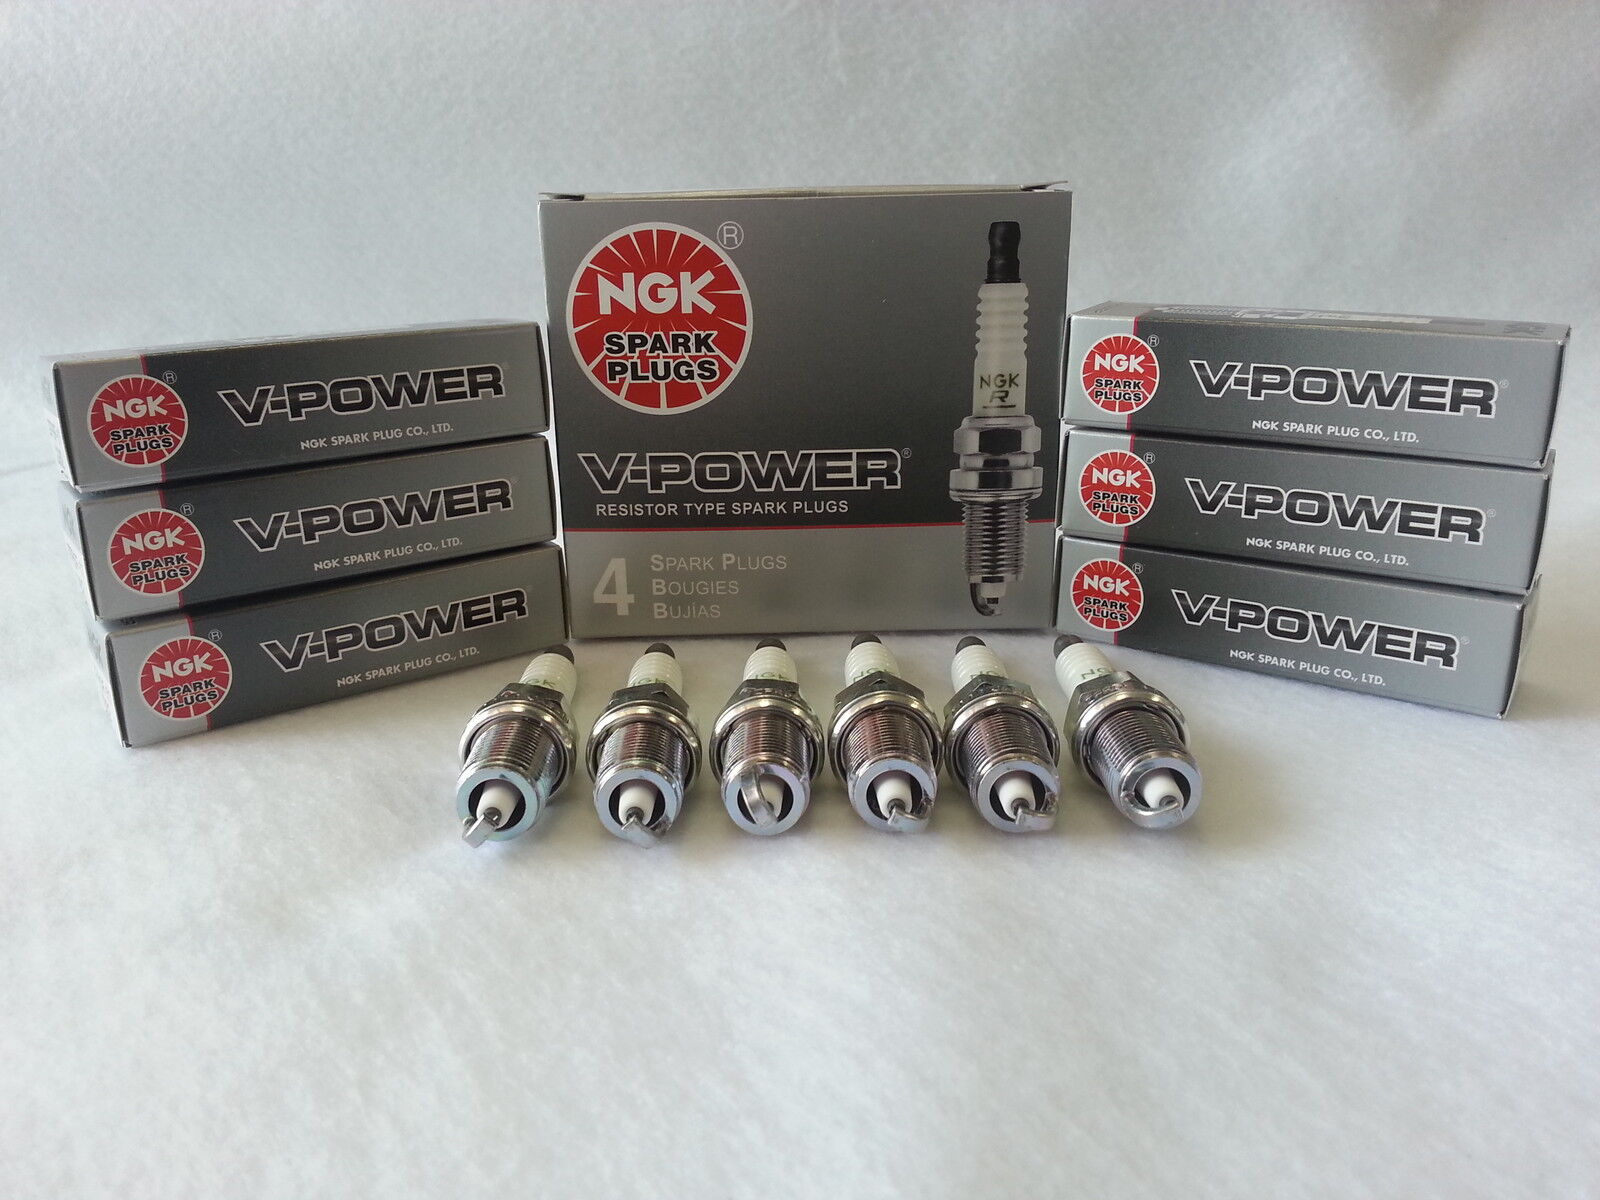 6-New NGK V-Power Copper Spark Plugs LFR5A11 #6376 Made in Japan 